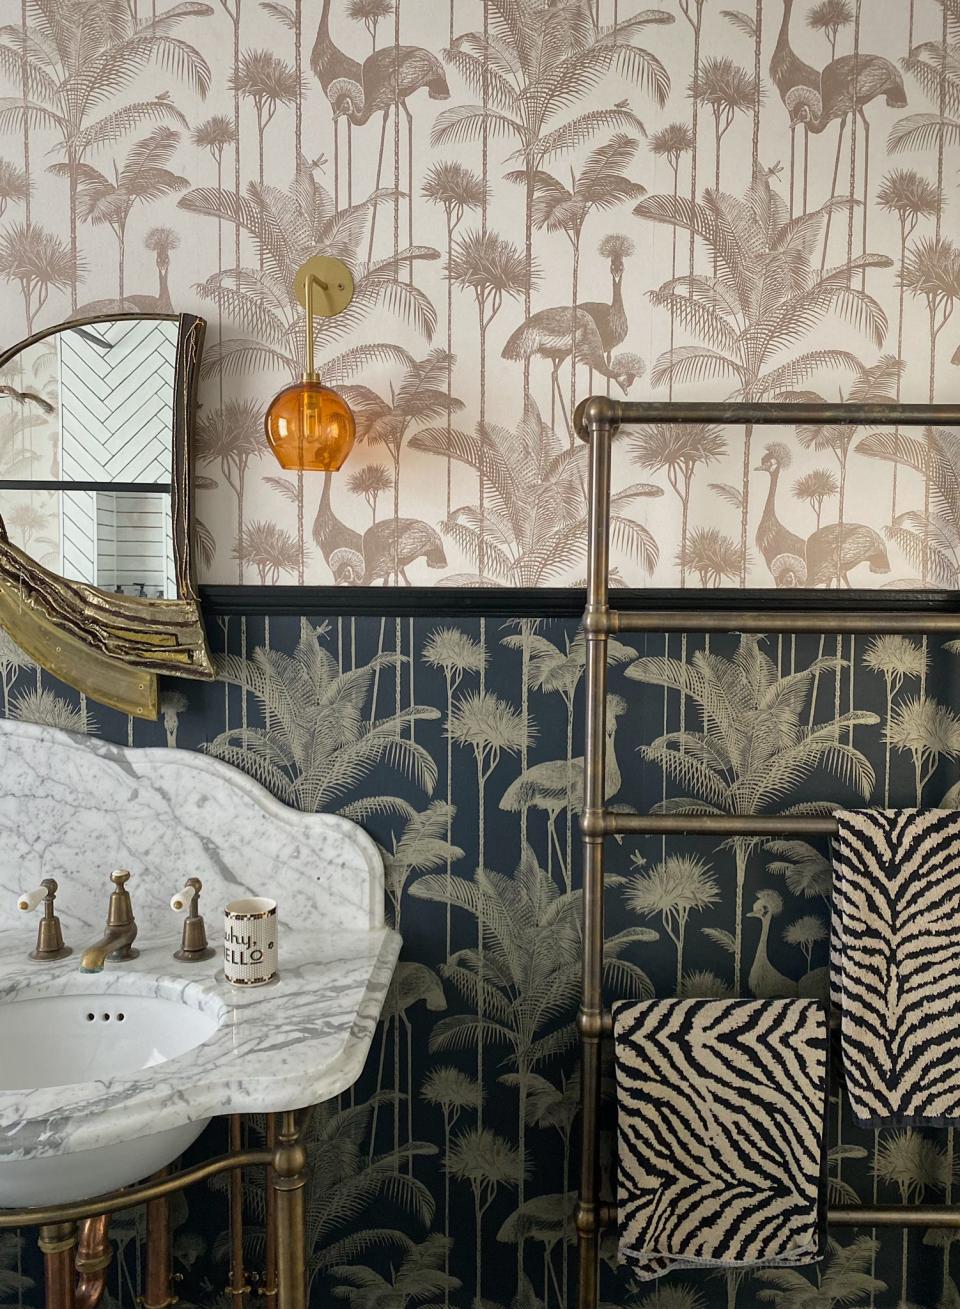 <p> &apos;Use contrasting colors in the same print for added design detail and maximum wallpaper magic,&#x2019; says Jamie Watkins, co-founder at Divine Savages. &#x2018;Here, Always Sunday founder Lexi Dart has expertly combined our Crane Fonda wallpapers in Soft Copper and Black Gold for an extra divine and savage twist in her bathroom.&#xA0; </p> <p> &#x2018;We love this design trick. It&#x2019;s at once playful and at the same time sophisticated &#x2013; a different take on a classic monochrome scheme and rather than using a standard black and white wallpaper, this has a decadent edge to it.&#xA0;Also note the perfect pattern matching on the two halves&#x2026; it&#x2019;s these small design details that count.&#x2019; </p>